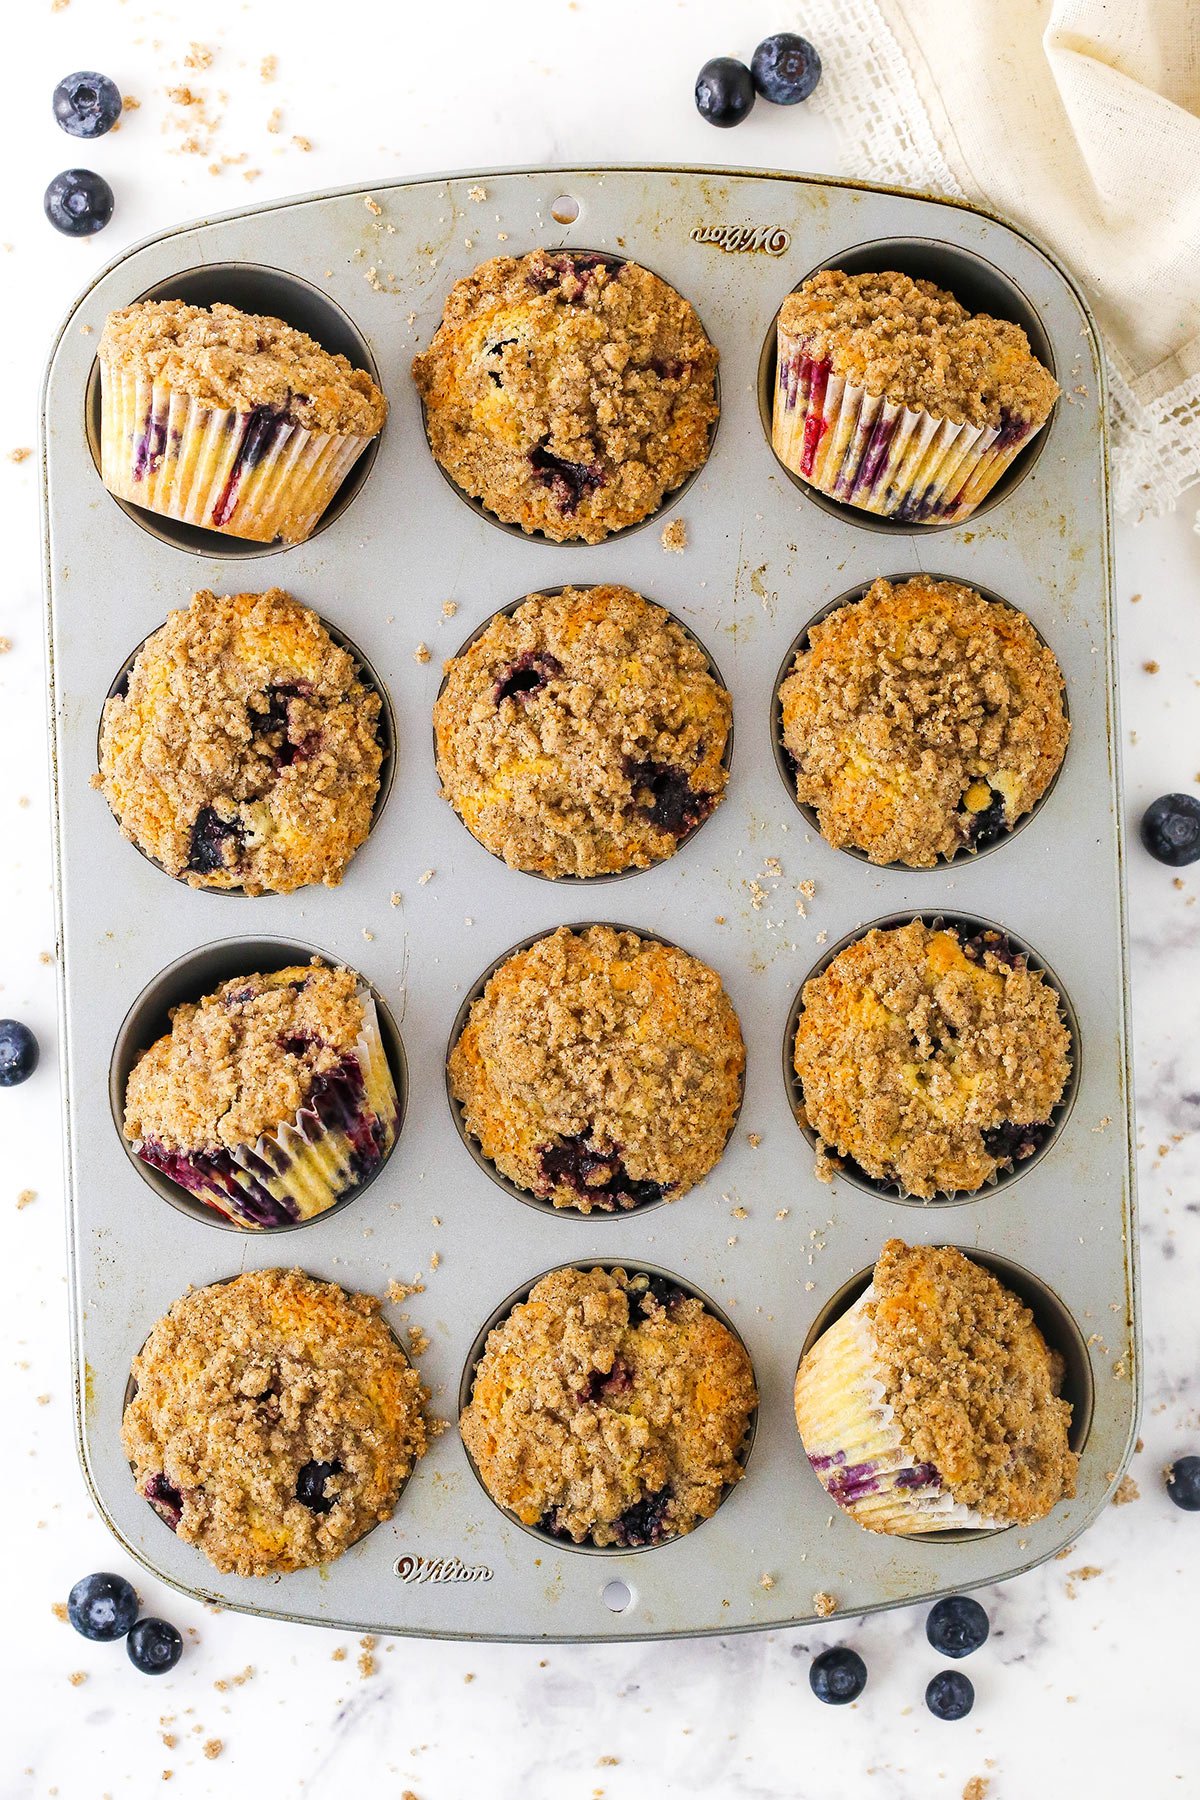 A 12-count muffin tin with a homemade blueberry muffin inside of each muffin cup